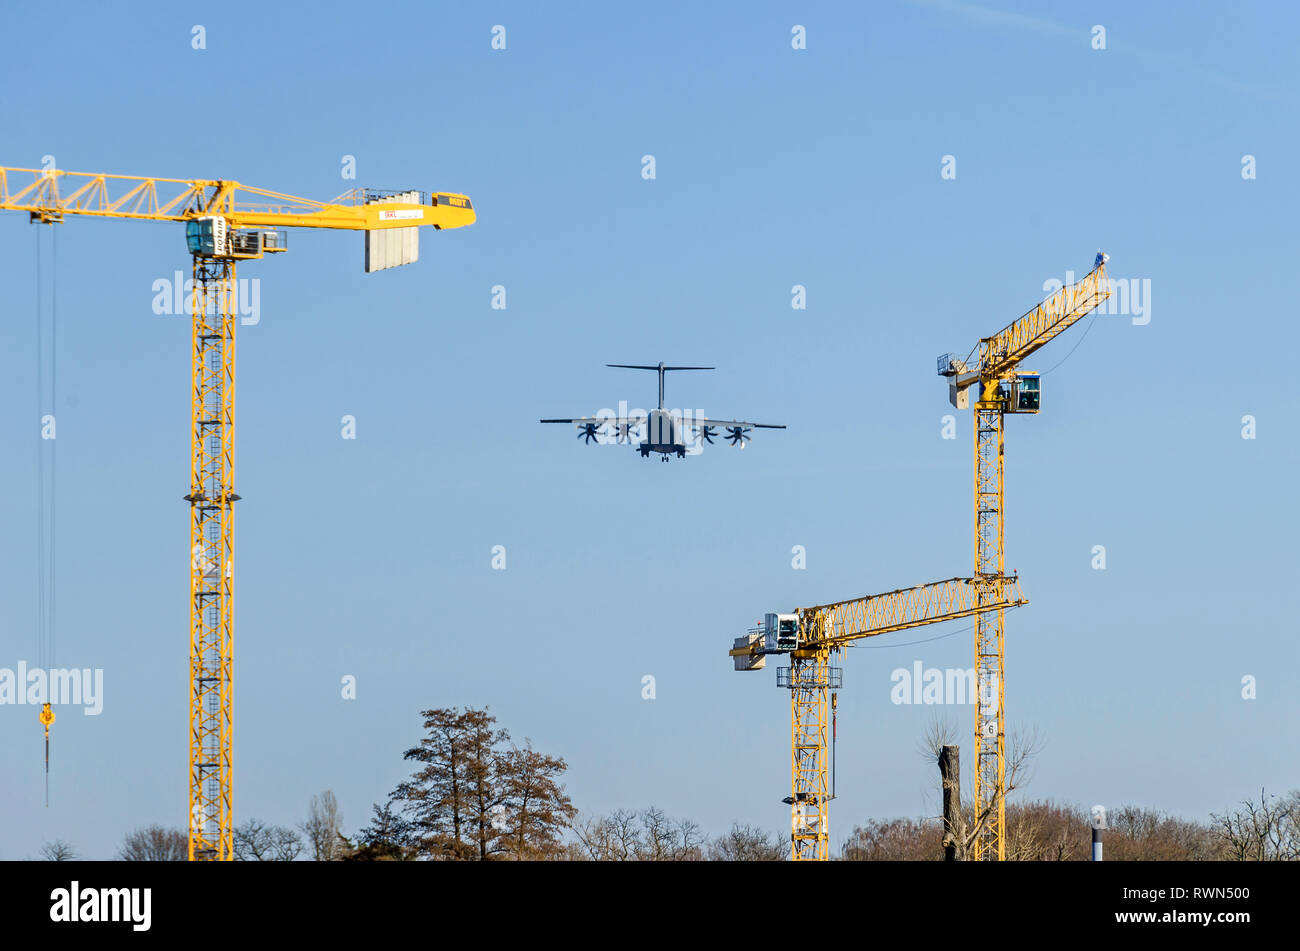 Berlin, Germany - February 22, 2019: Four-engine turboprop military transport aircraft (presumably Airbus A-400M Atlas) heading the landing strip Stock Photo